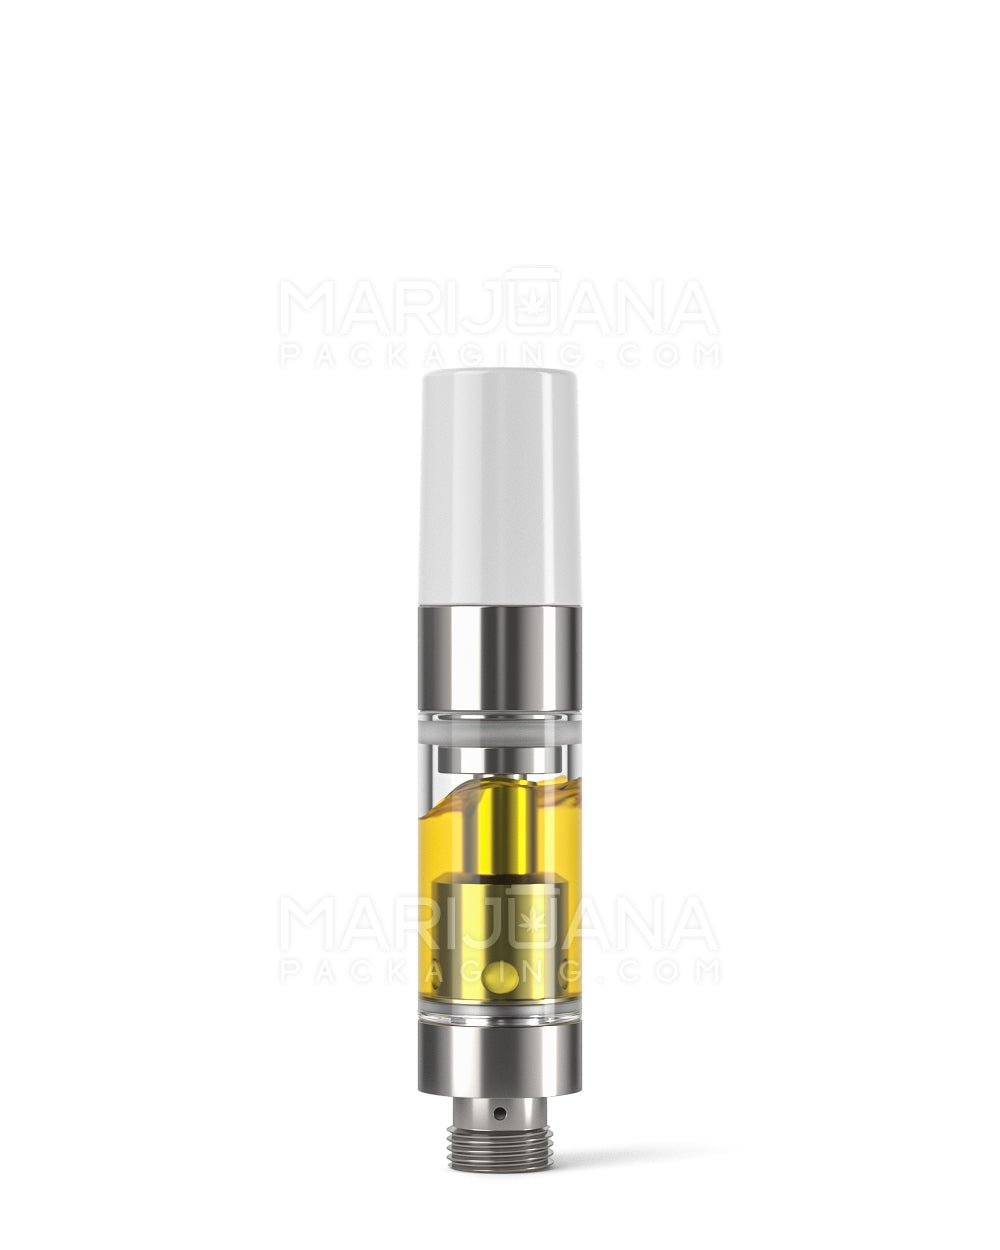 Ceramic Core Glass Vape Cartridge with Round White Plastic Mouthpiece | 0.5mL - Press On - 1200 Count - 2